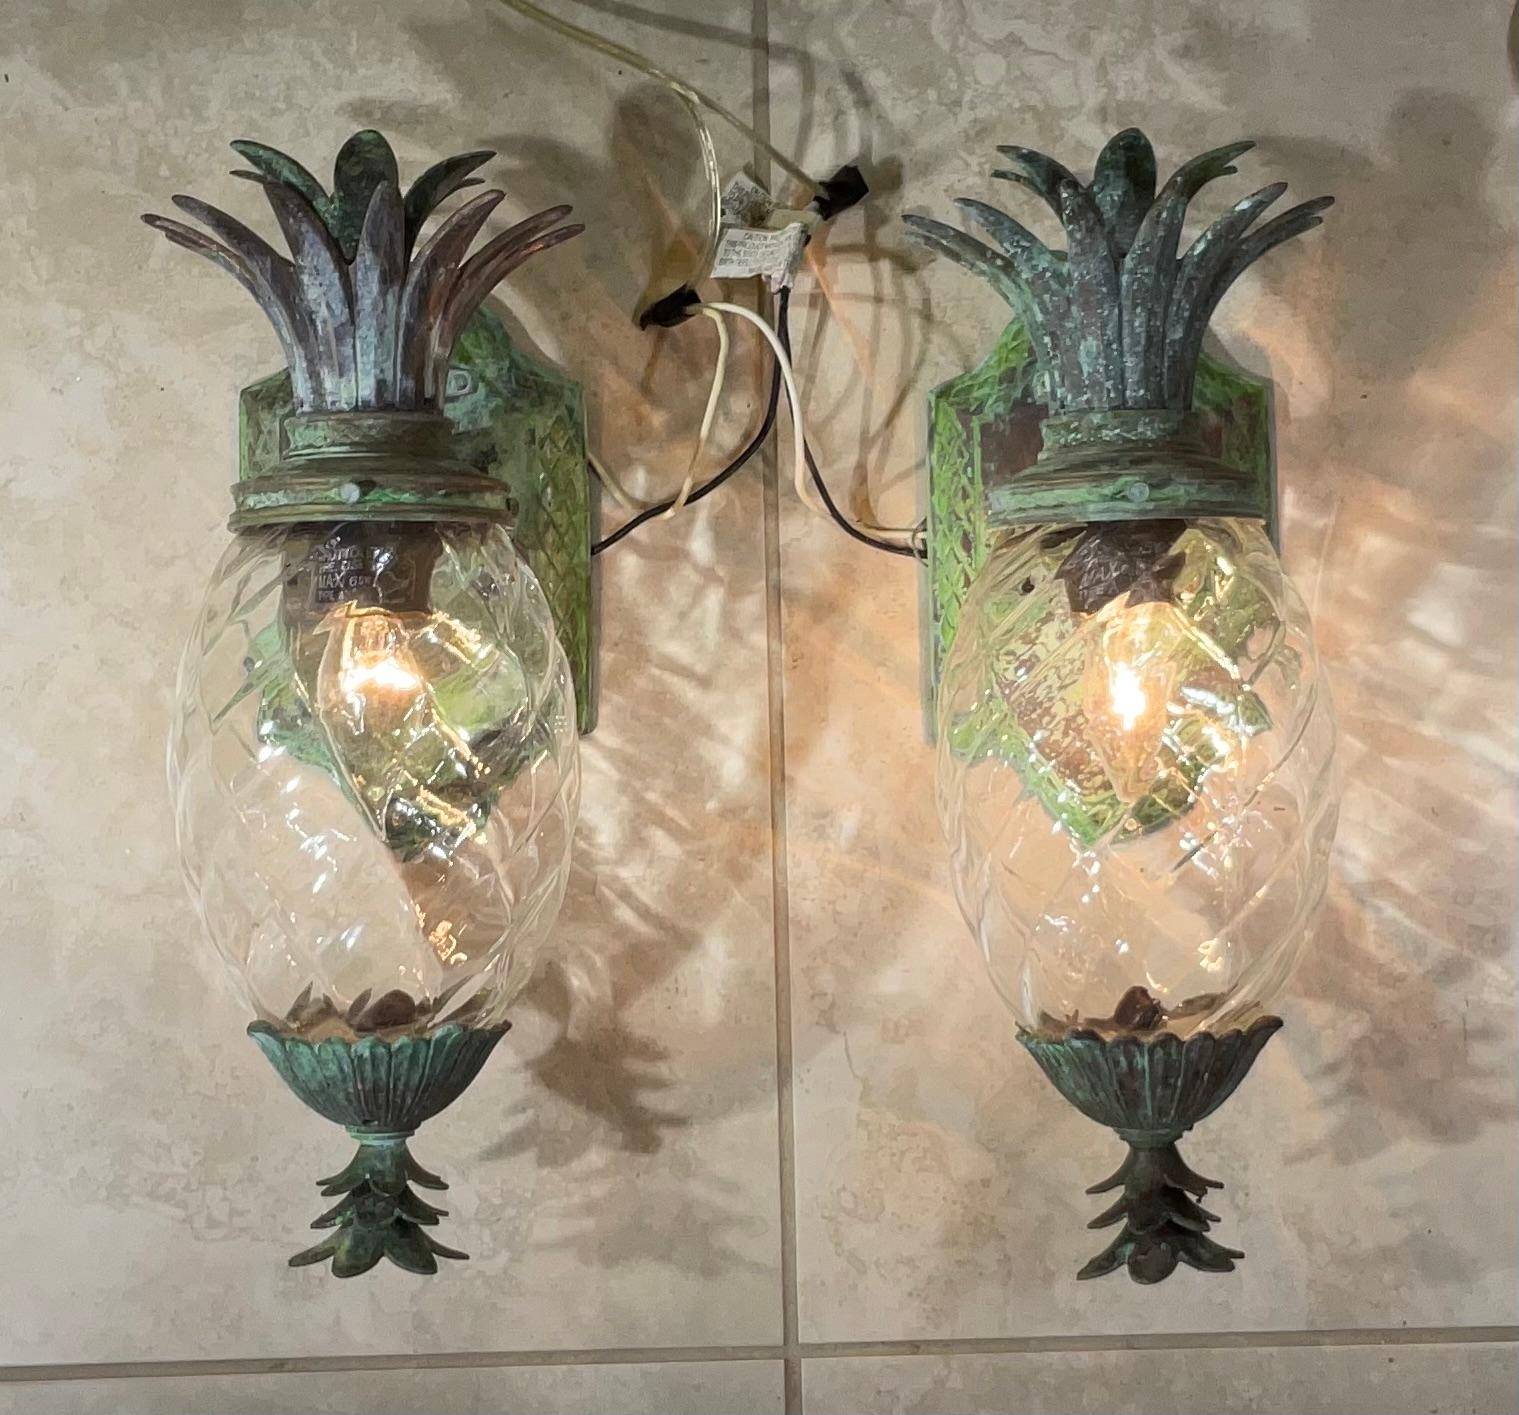 Beautiful pair of pineapple wall light made of bronze and solid brass with one 60/watt light each, great patina, decorative for indoor or outdoor.
Ready to use, suitable for wet locations.